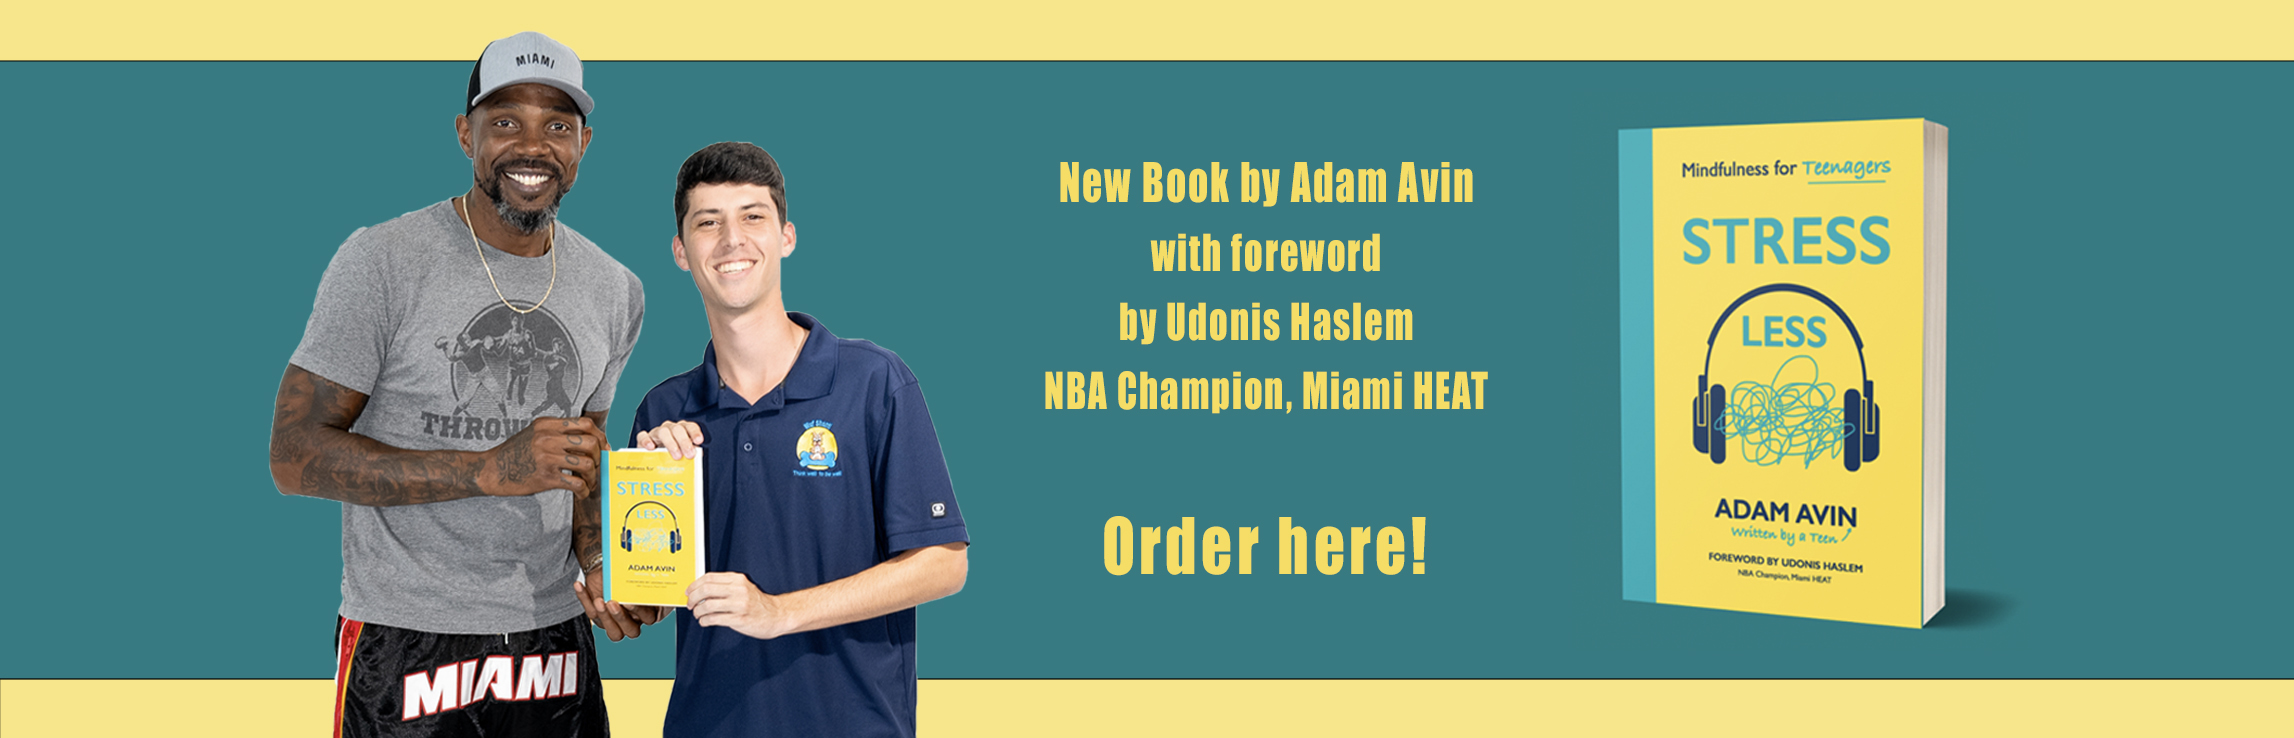 Mental Health Education Advocate, Adam Avin, of the Wuf Shanti Children's Wellness Foundation, releases new book, Stress Less: Mindfulness for Teens, with foreword by Udonis Haslem, 3x NBA Champion, Miami Heat.